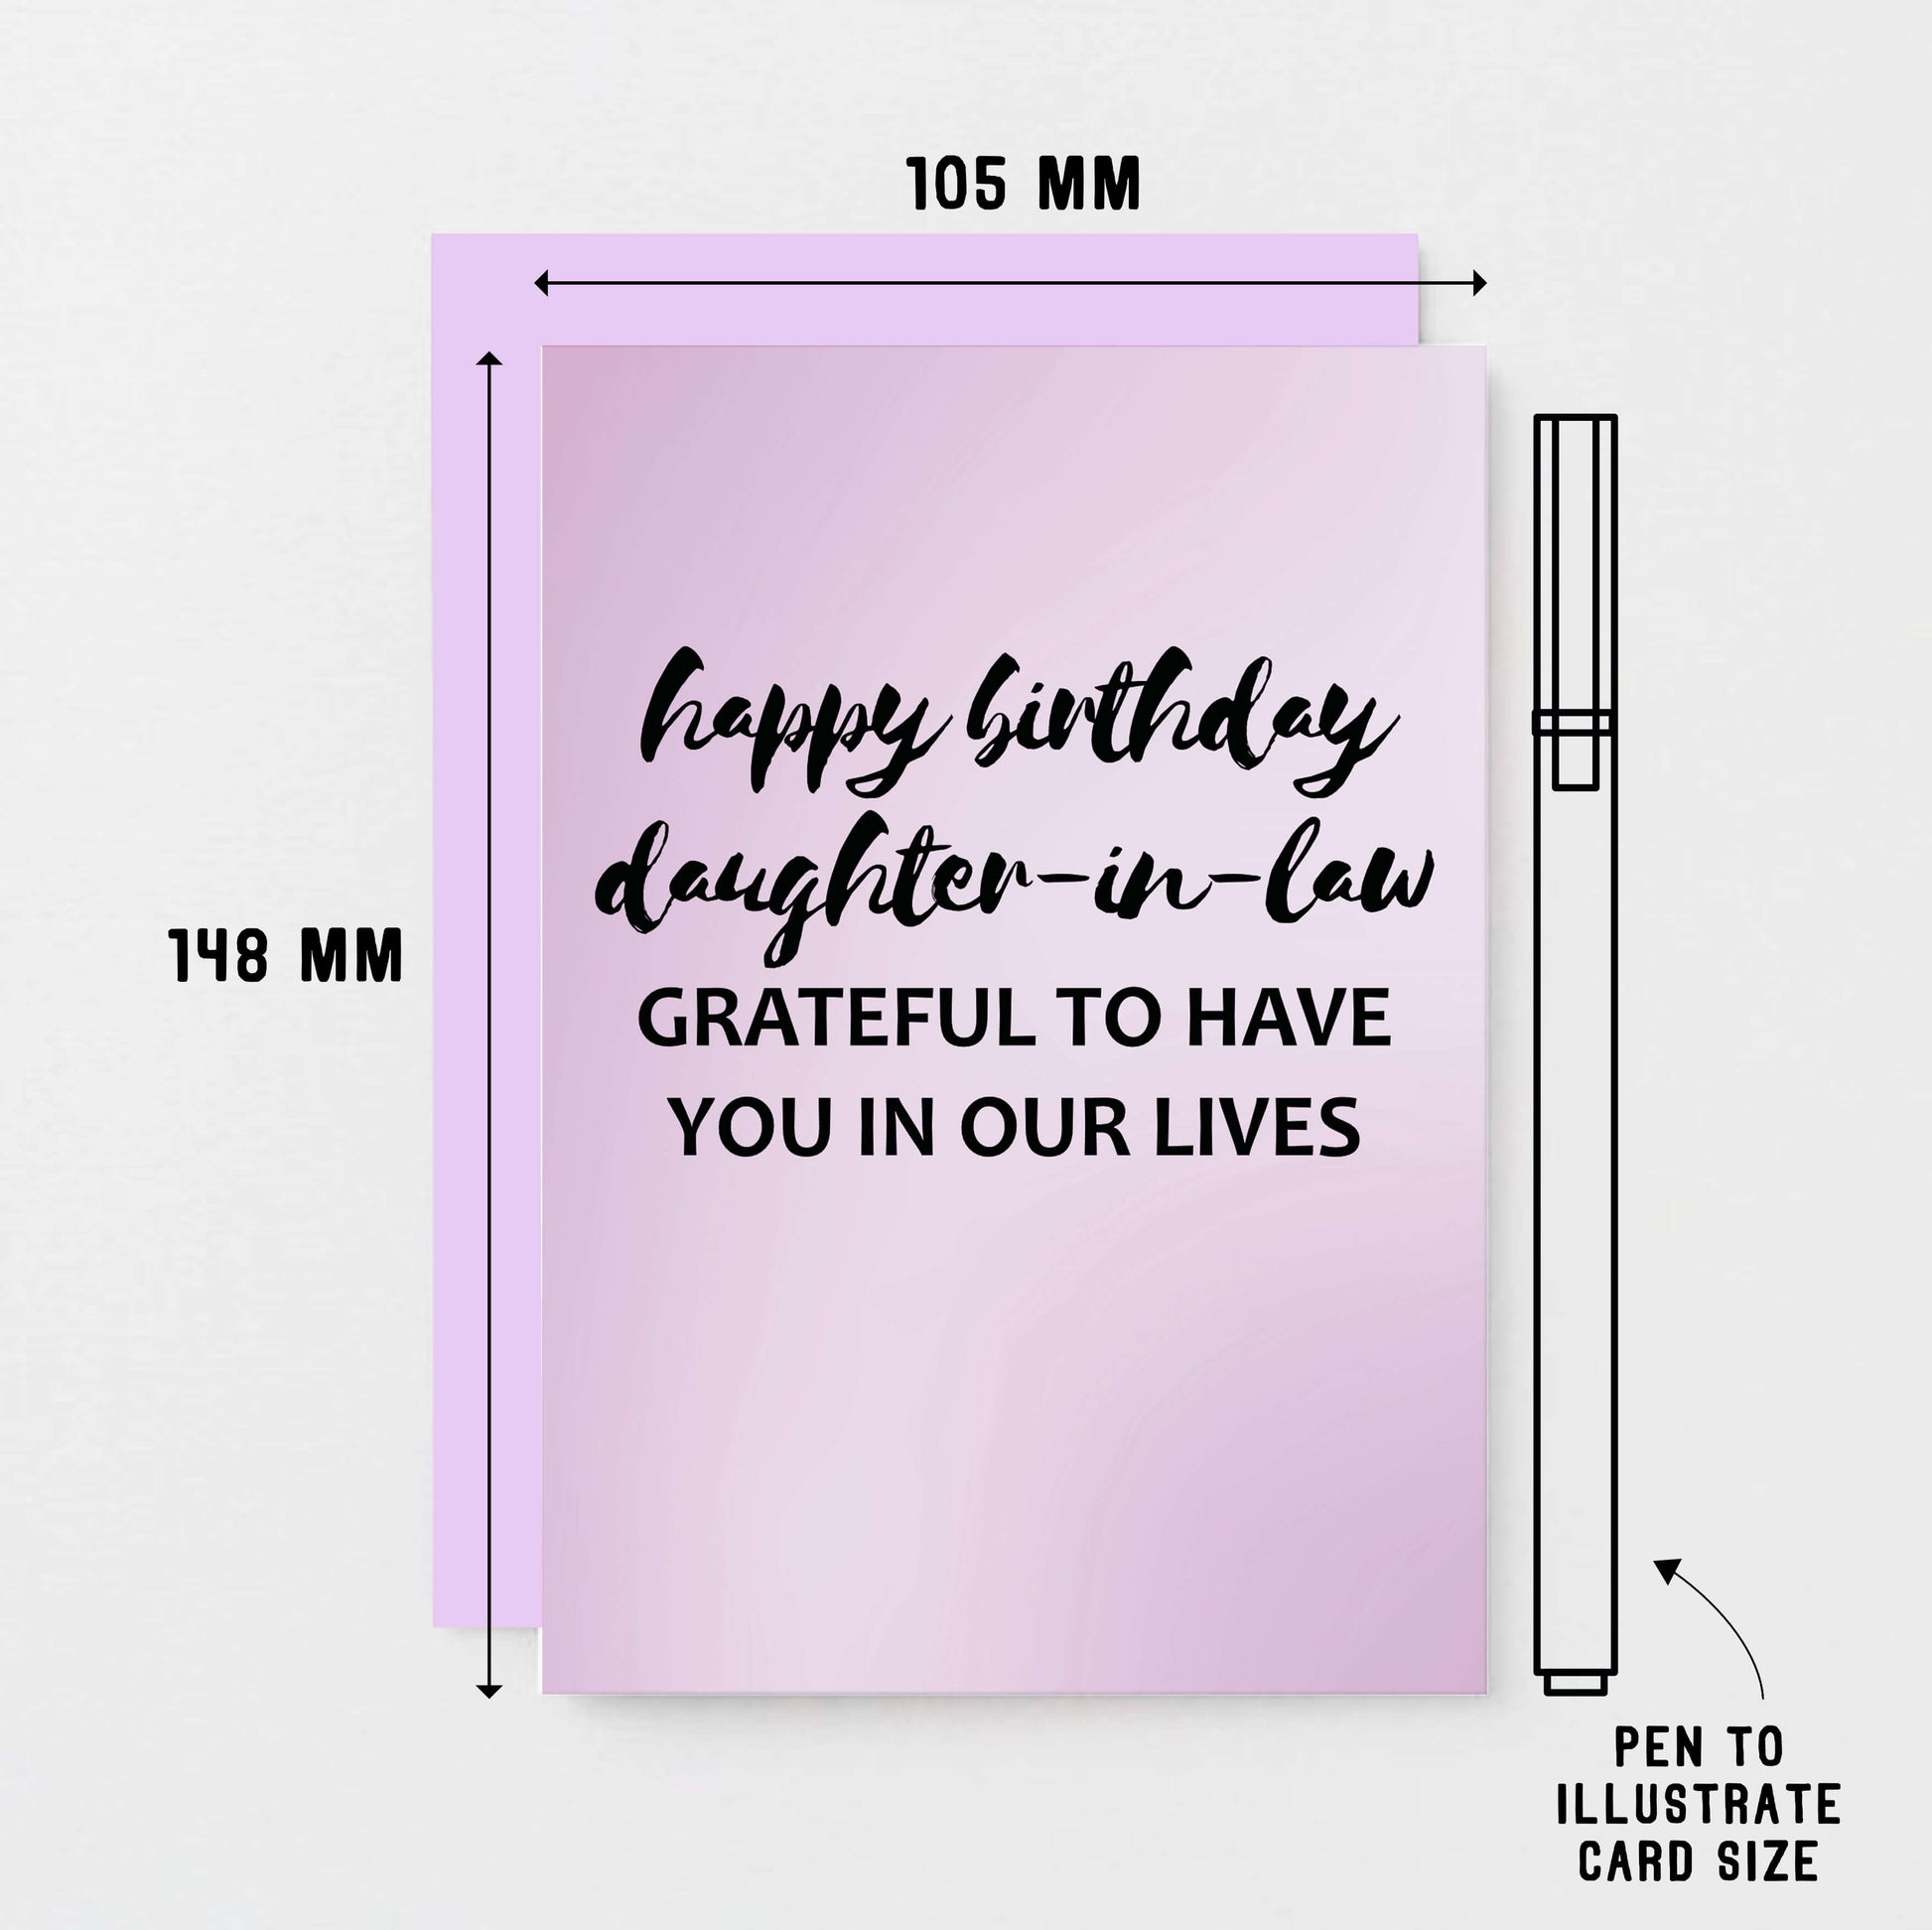 Daughter-in-Law Birthday Card by SixElevenCreations. Reads Happy birthday daughter-in-law. Grateful to have you in our lives. Product Code SE3035A6